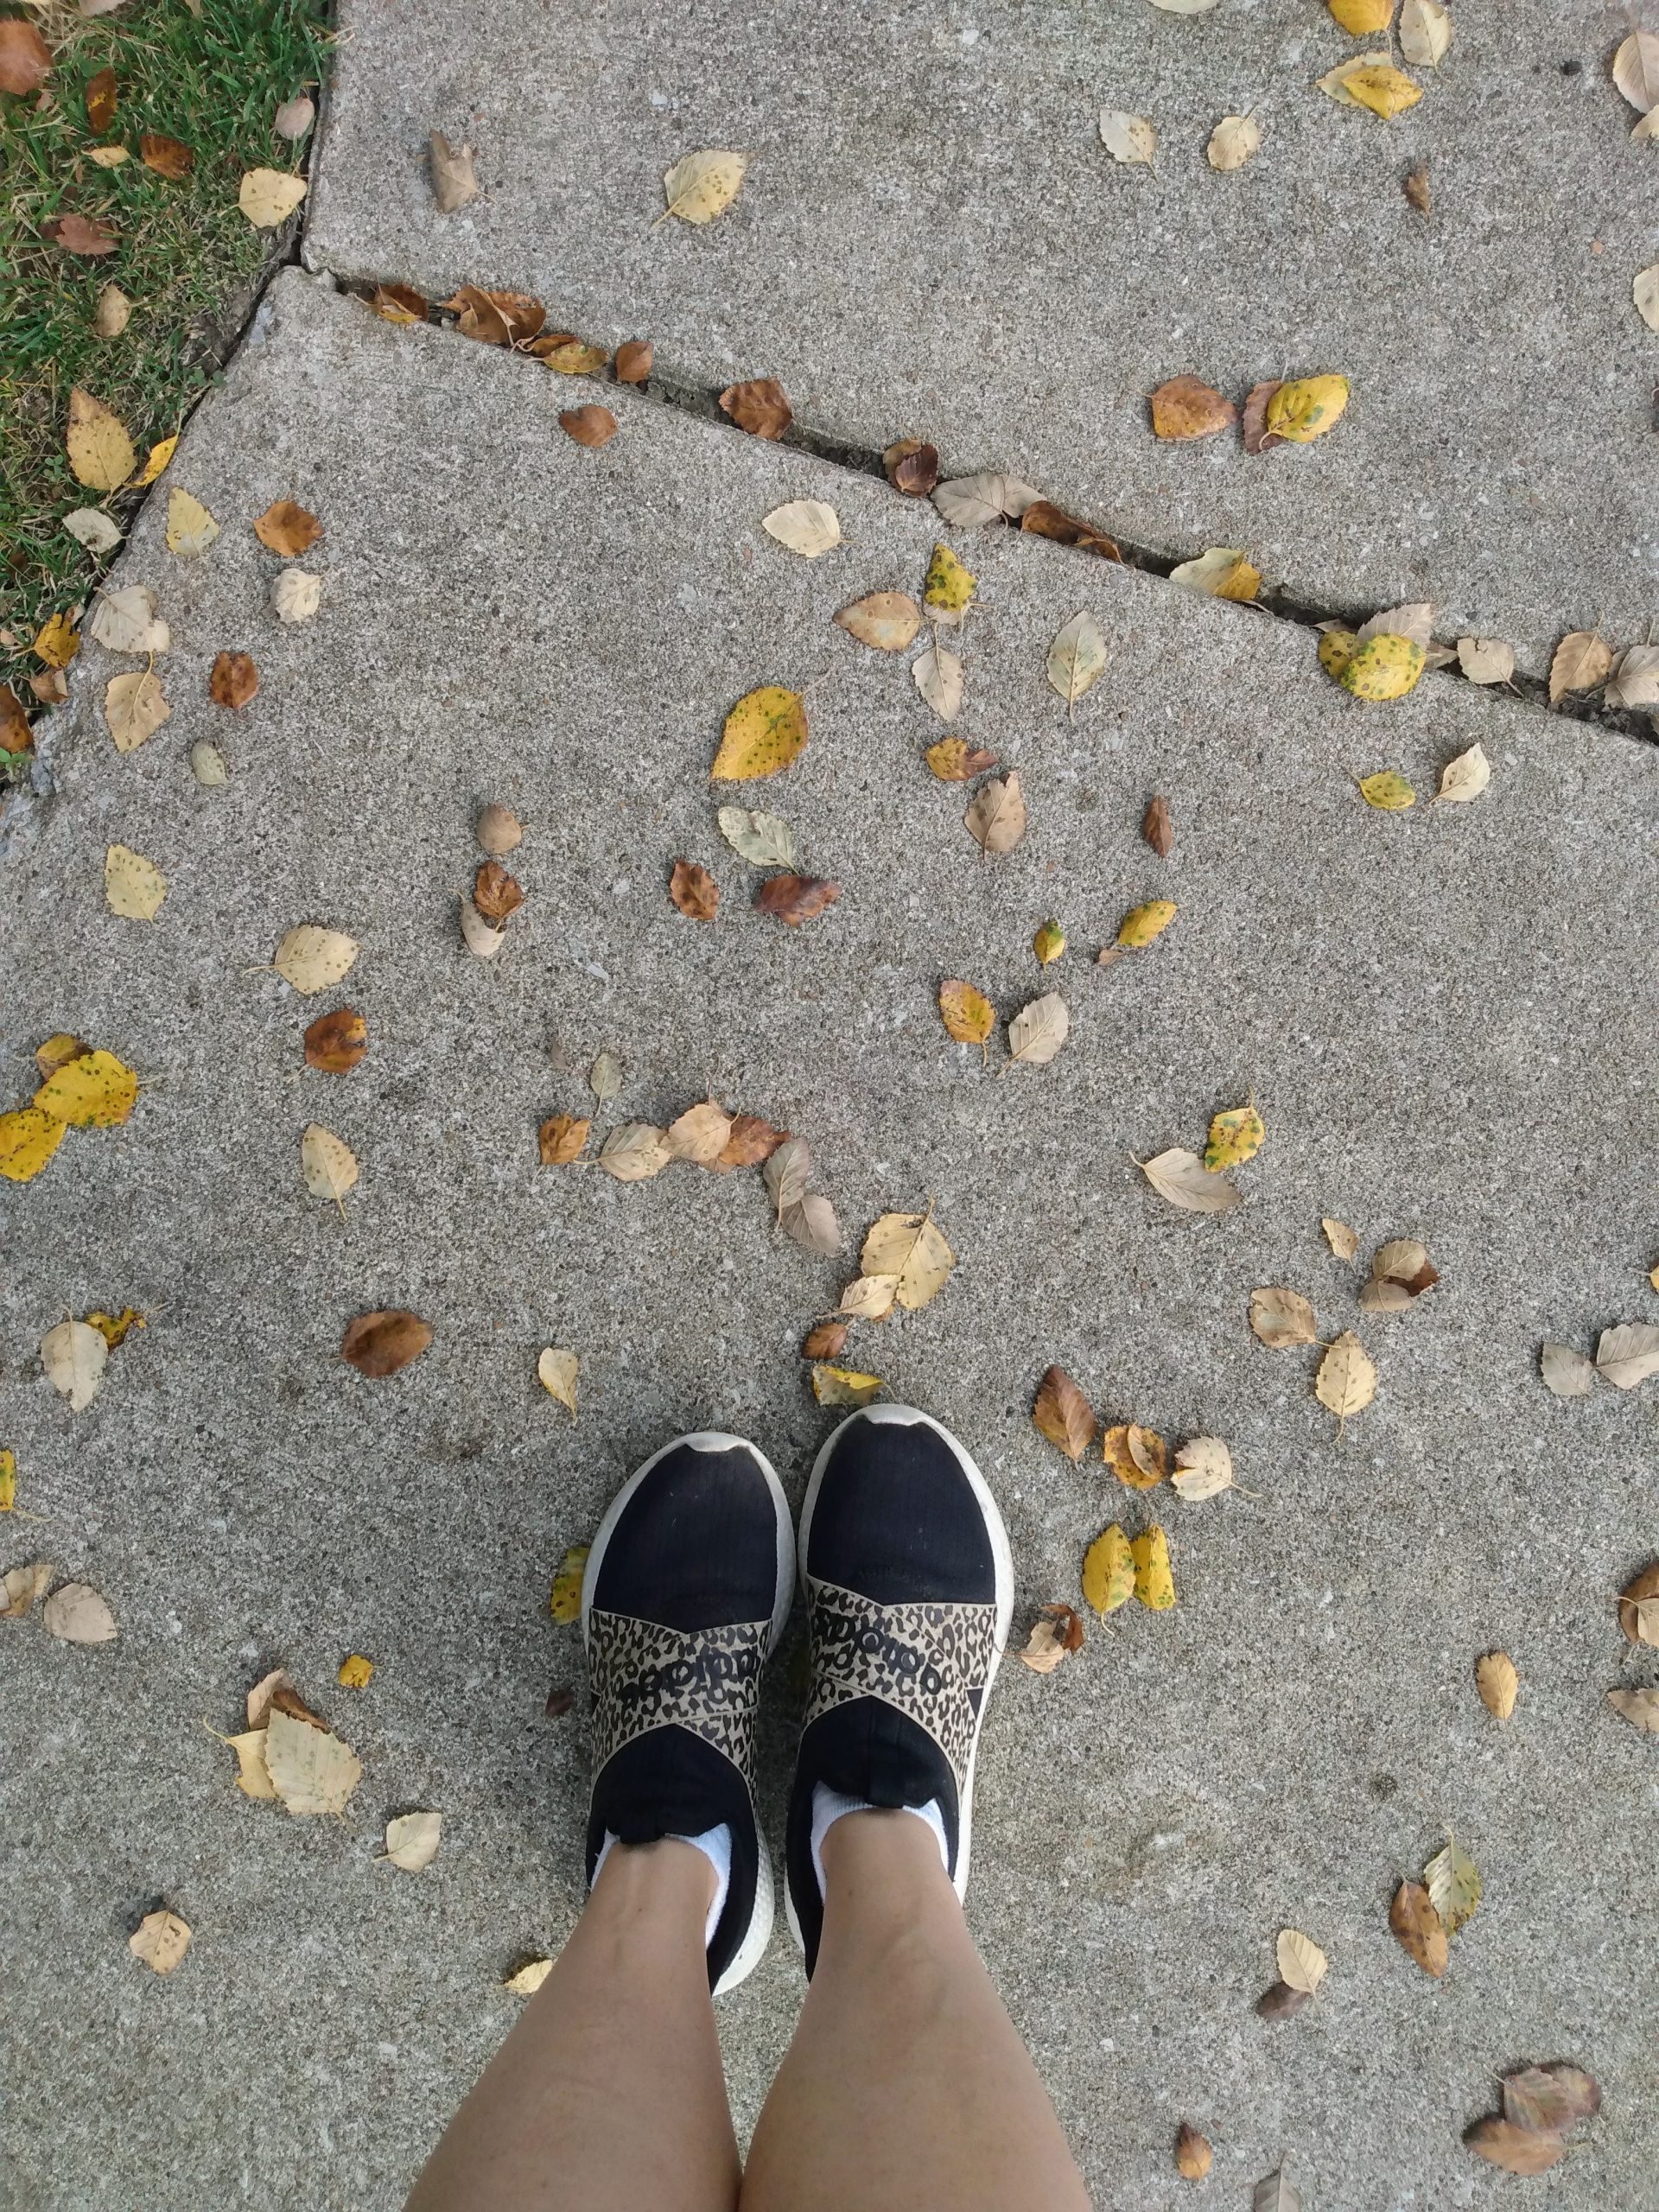 a view of a woman's lower legs in running shoes on a sidewalk strewn with fall leaves